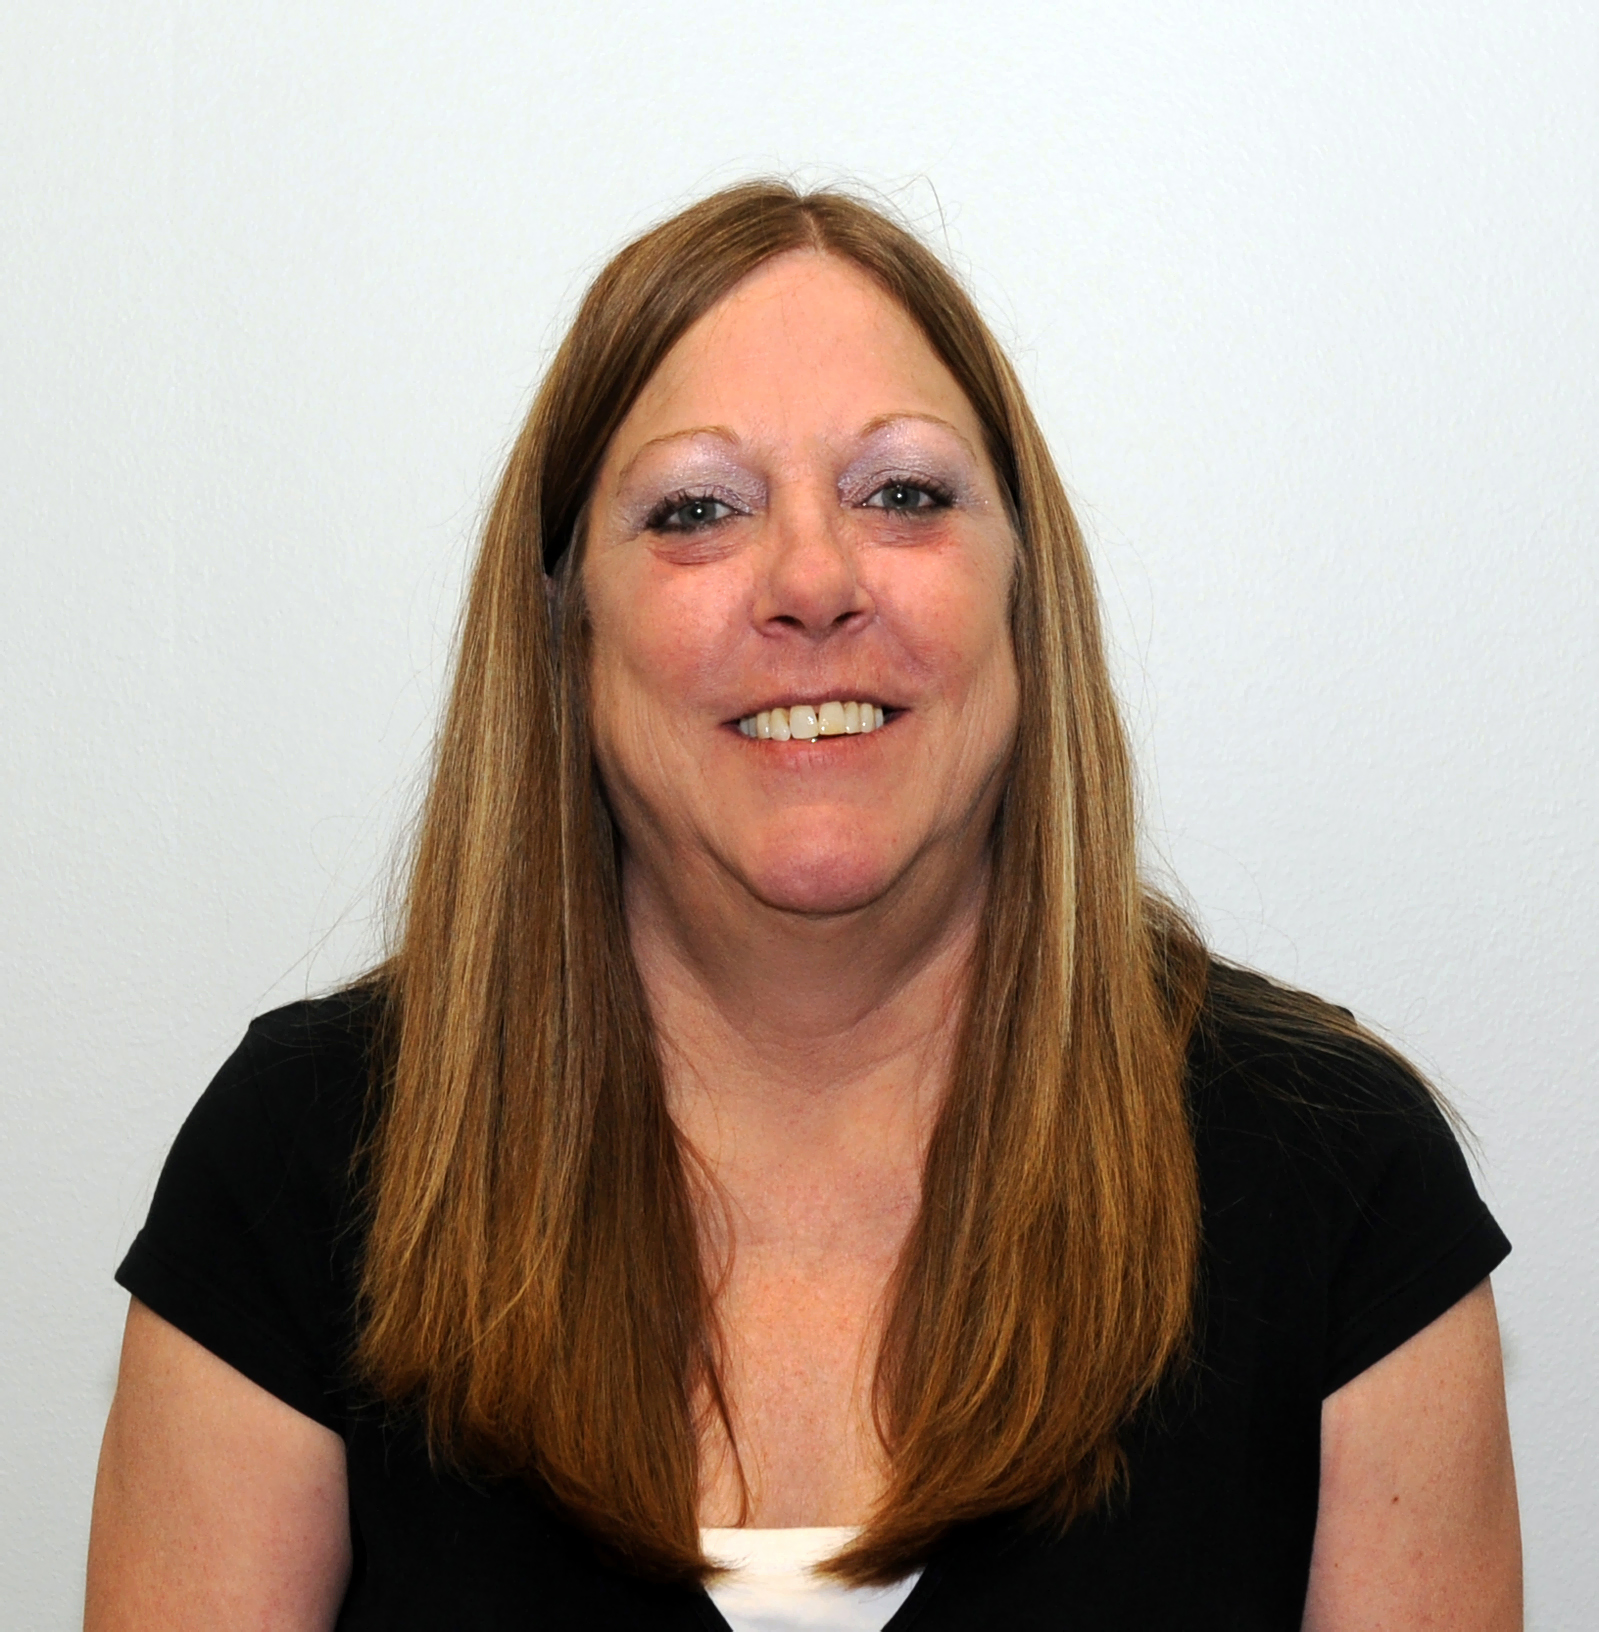 Cindy Staton, APM Technical Support Team Leader